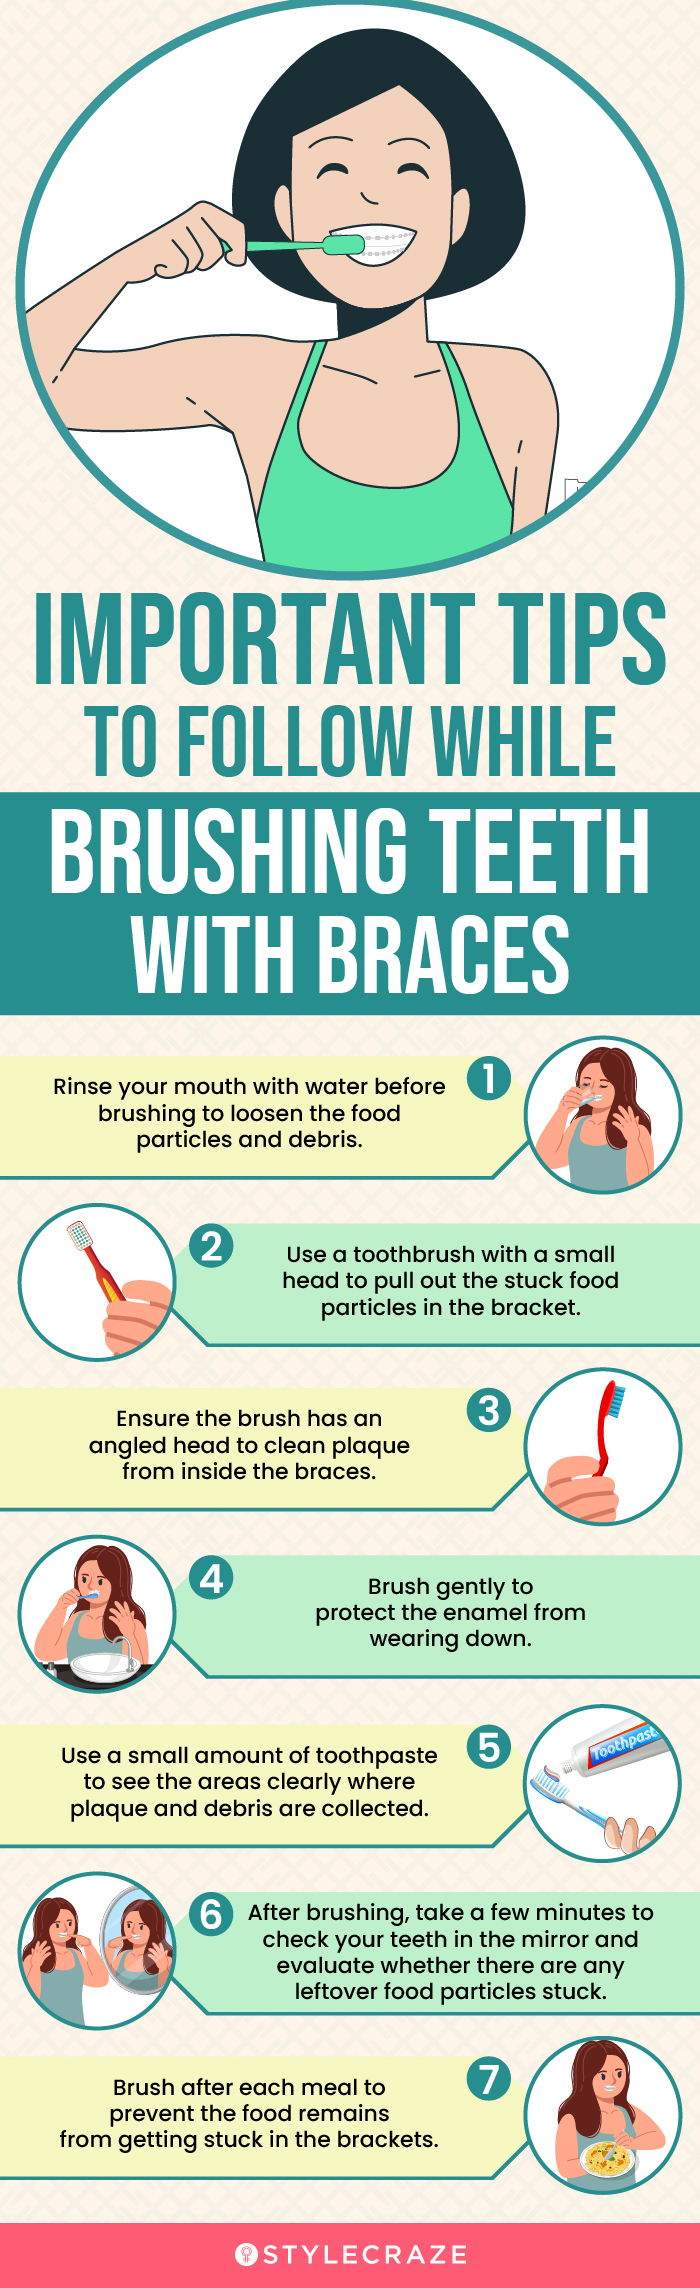 Important Tips To Follow While Brushing Teeth With Braces (infographic)